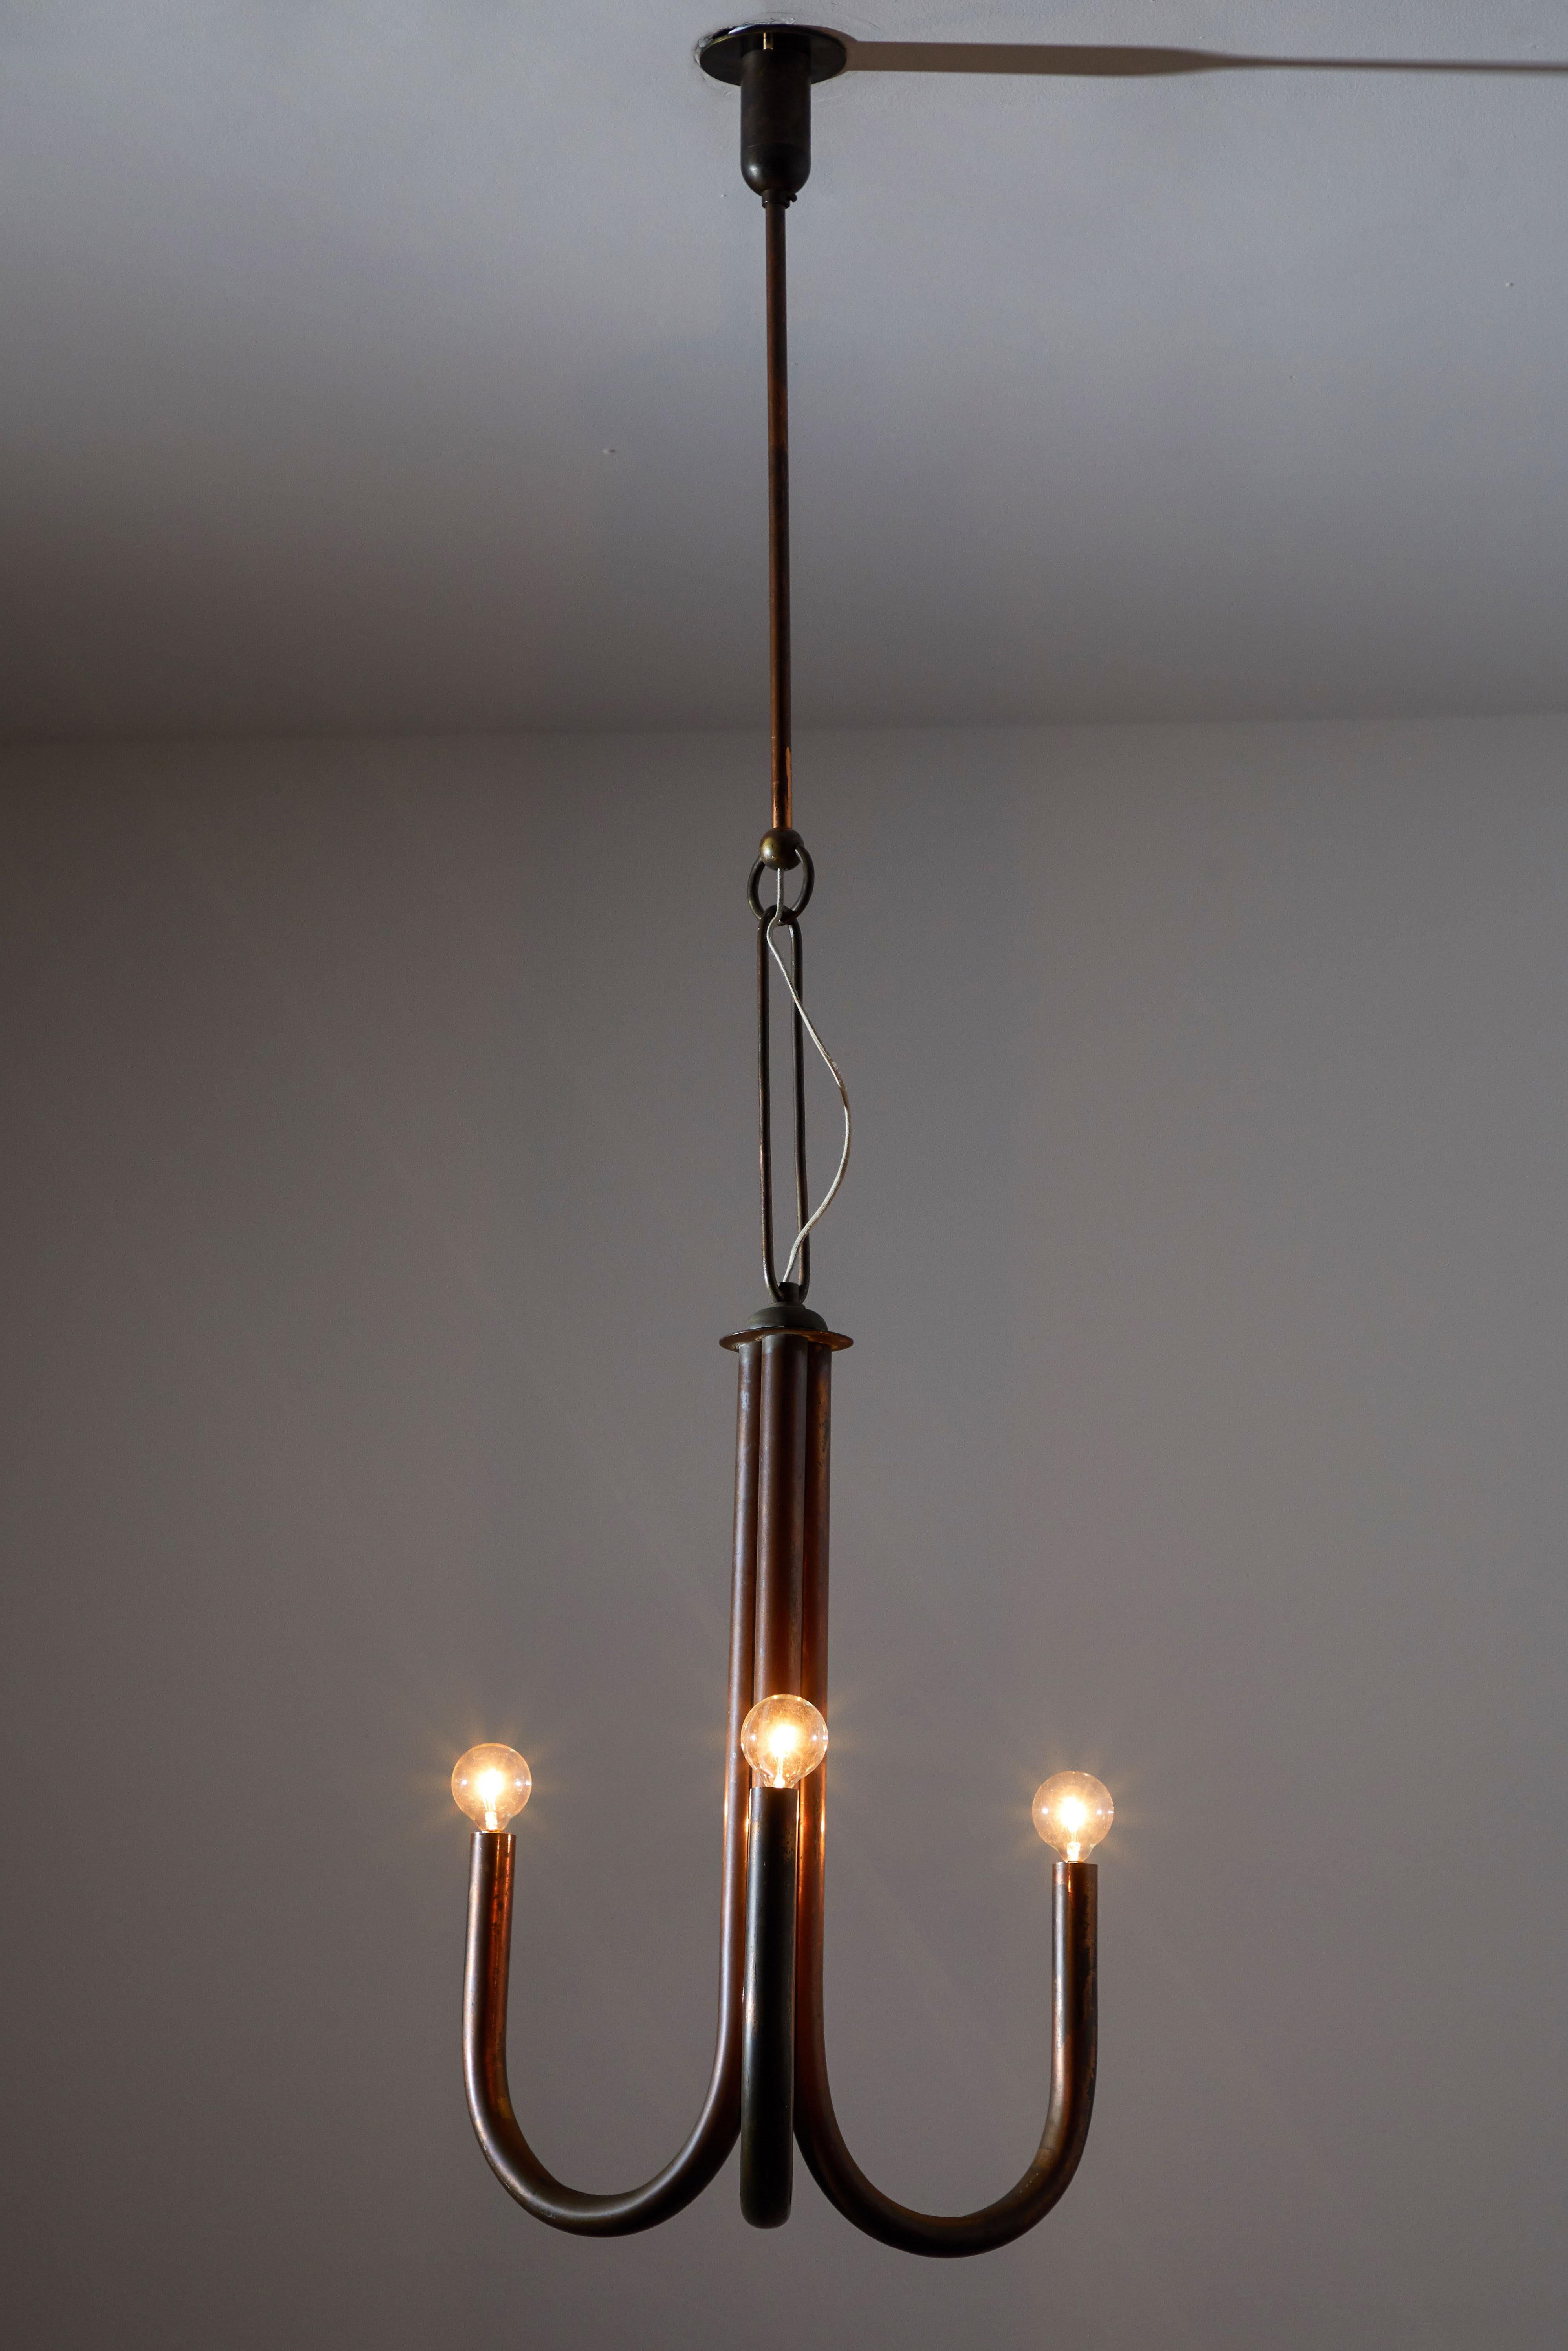 Pendant attributed to Guglielmo Ulrich. Manufactured in Italy circa late 1930s. Copper plated brass with custom brass ceiling plate. Rewired for US junction boxes. Takes three E27 candelabra bulbs, 40 watts maximum each. Bulbs provided as a one time